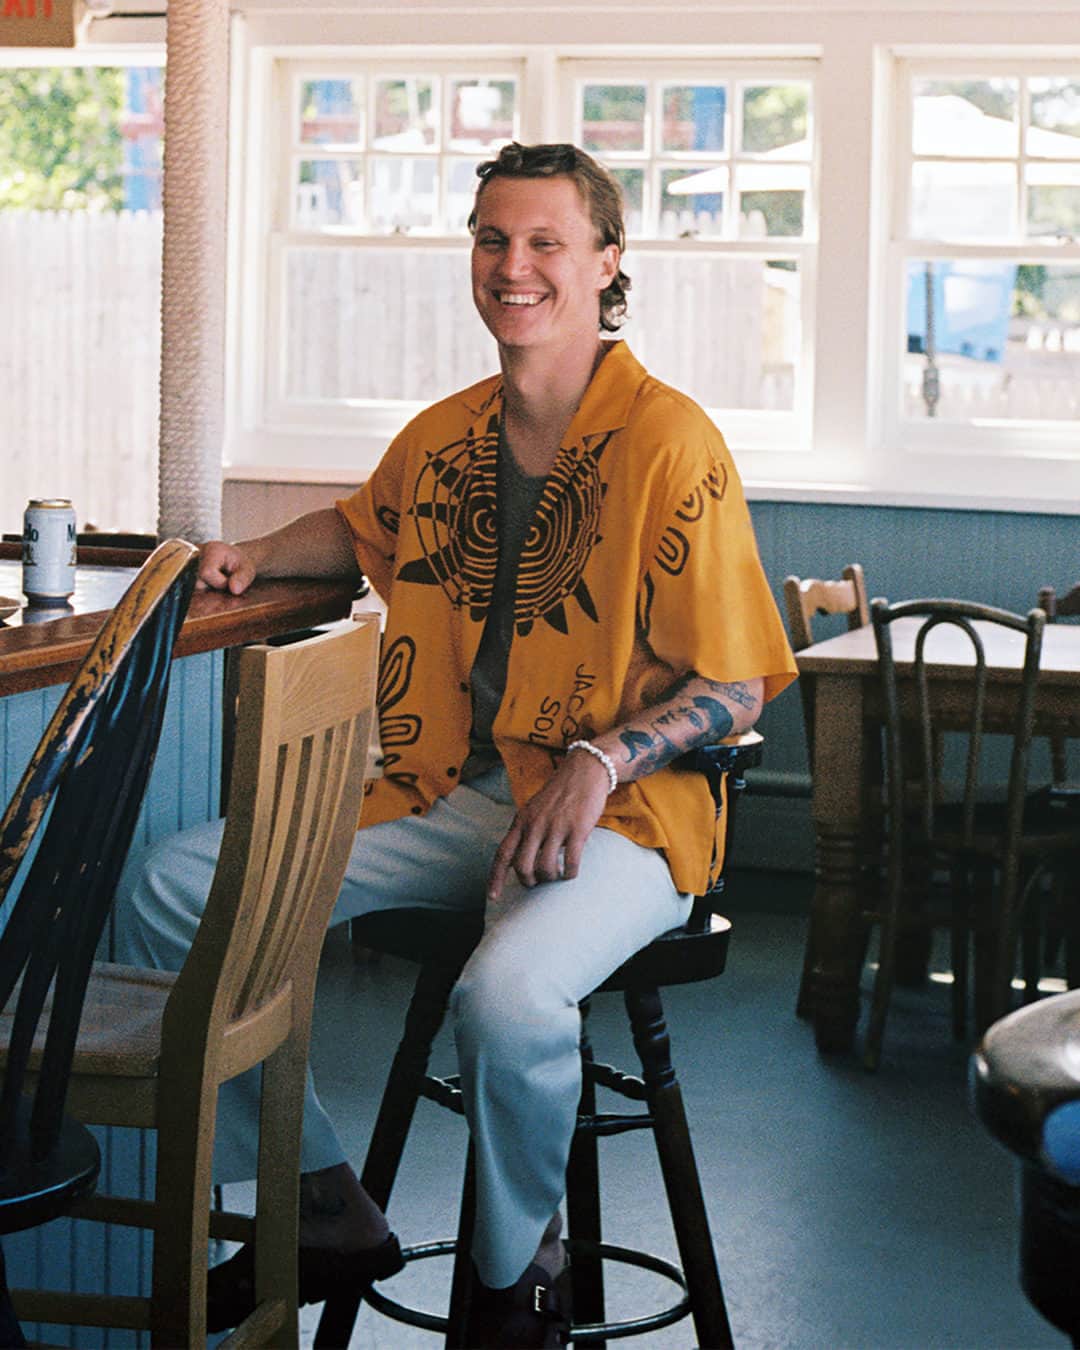 MR PORTERのインスタグラム：「At 35 years old, chef Mr @robertsieber has a CV jam-packed with a wealth of experience spanning a still-unfolding career. Sieber – who most recently spearheaded culinary efforts at @thesurflodge and @thesnowlodgeaspen in Montauk and Aspen, respectively – shares his next steps back towards the kitchen and lets us join him for a day in The Hamptons.   Read the full story in The Journal - link in bio.  Words by: Mr Stephen Ostrowski Photographer: @adriannaglaviano  Styling: @rhonibryan / @otterjezamin  Production: @hattiegable / @emilyelucas Art Direction: @catcous」